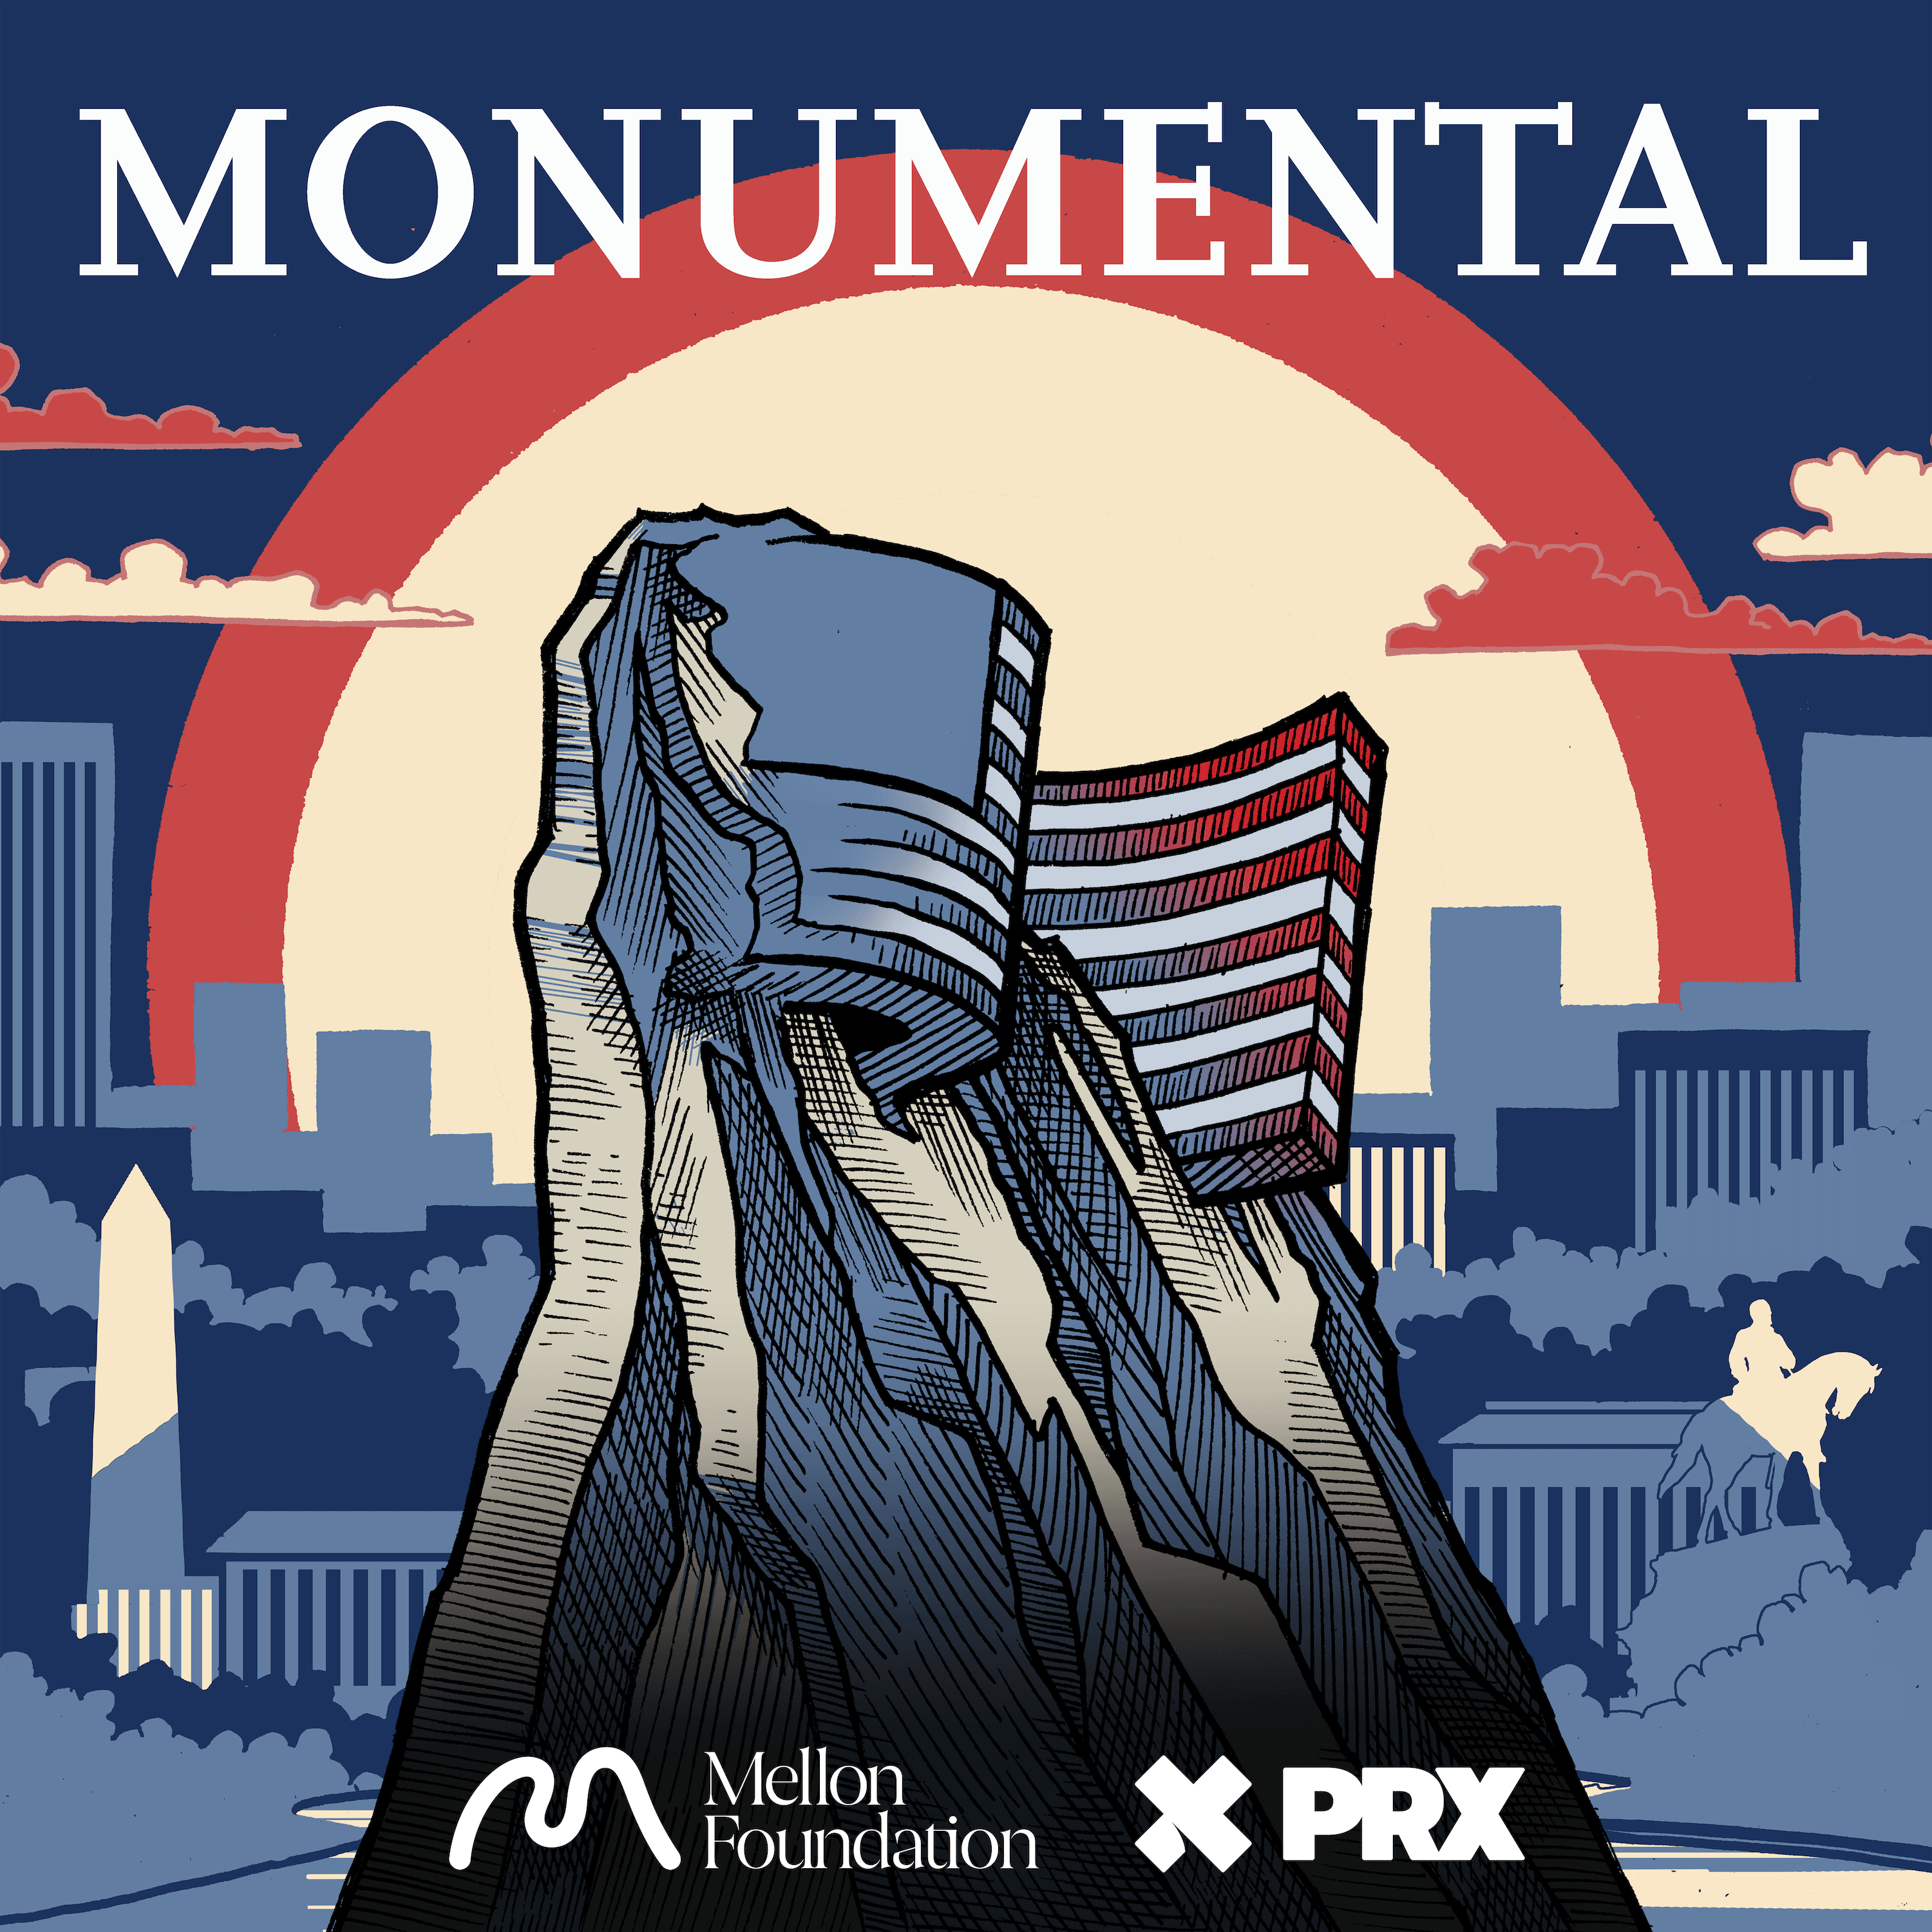 Thumbnail for "Bringing Monuments Home".